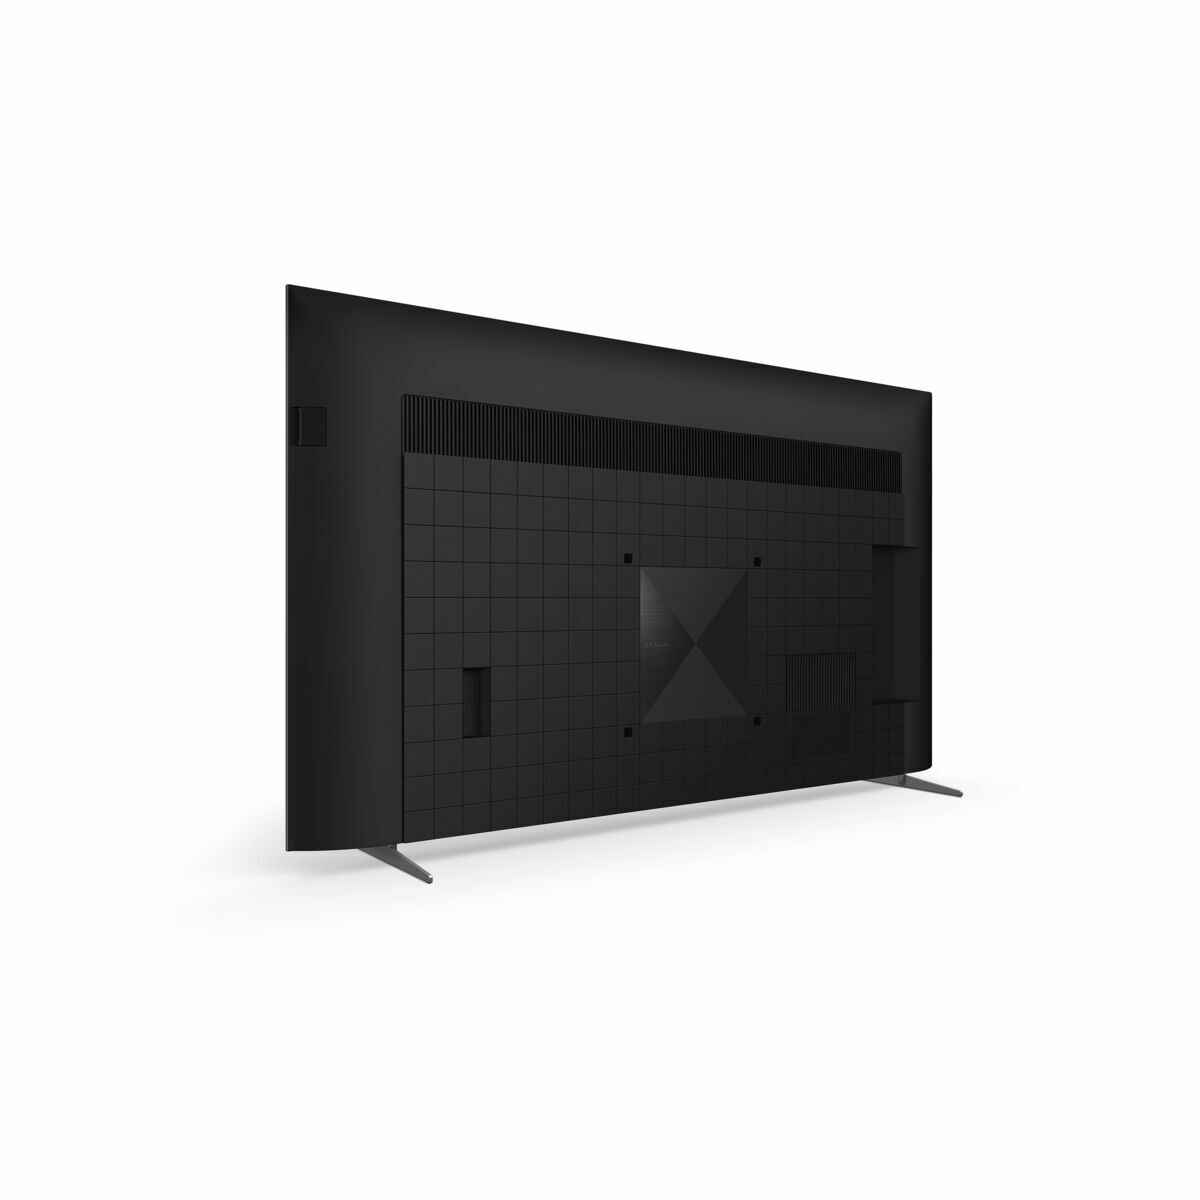 Smart TV Sony XR65X90KAEP 65" Ultra HD 4K LED Dolby Vision, Sony, Electronics, TV, Video and home cinema, smart-tv-sony-xr65x90kaep-65-ultra-hd-4k-led-dolby-vision, : 65 INCHES 165 CM, :65 INCHES or 165.1 CM, :Direct LED, :Ultra HD, Brand_Sony, category-reference-2609, category-reference-2625, category-reference-2931, category-reference-t-18805, category-reference-t-19653, cinema and television, Condition_NEW, entertainment, Price_+ 1000, RiotNook